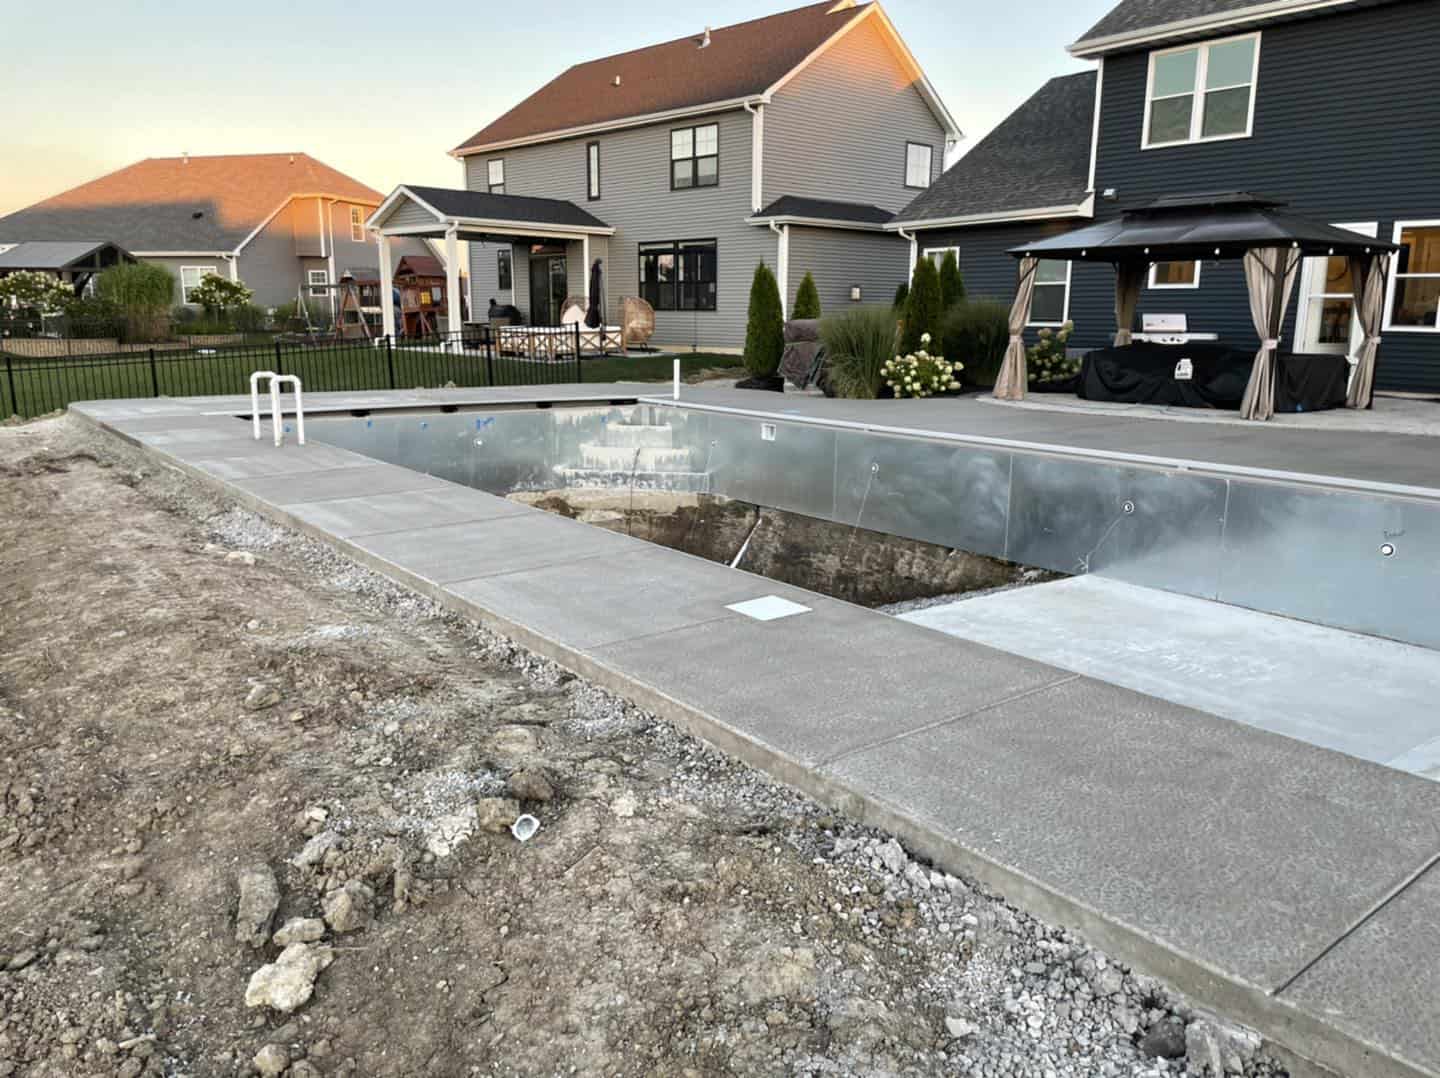 A swimming pool is being built in front of a house.